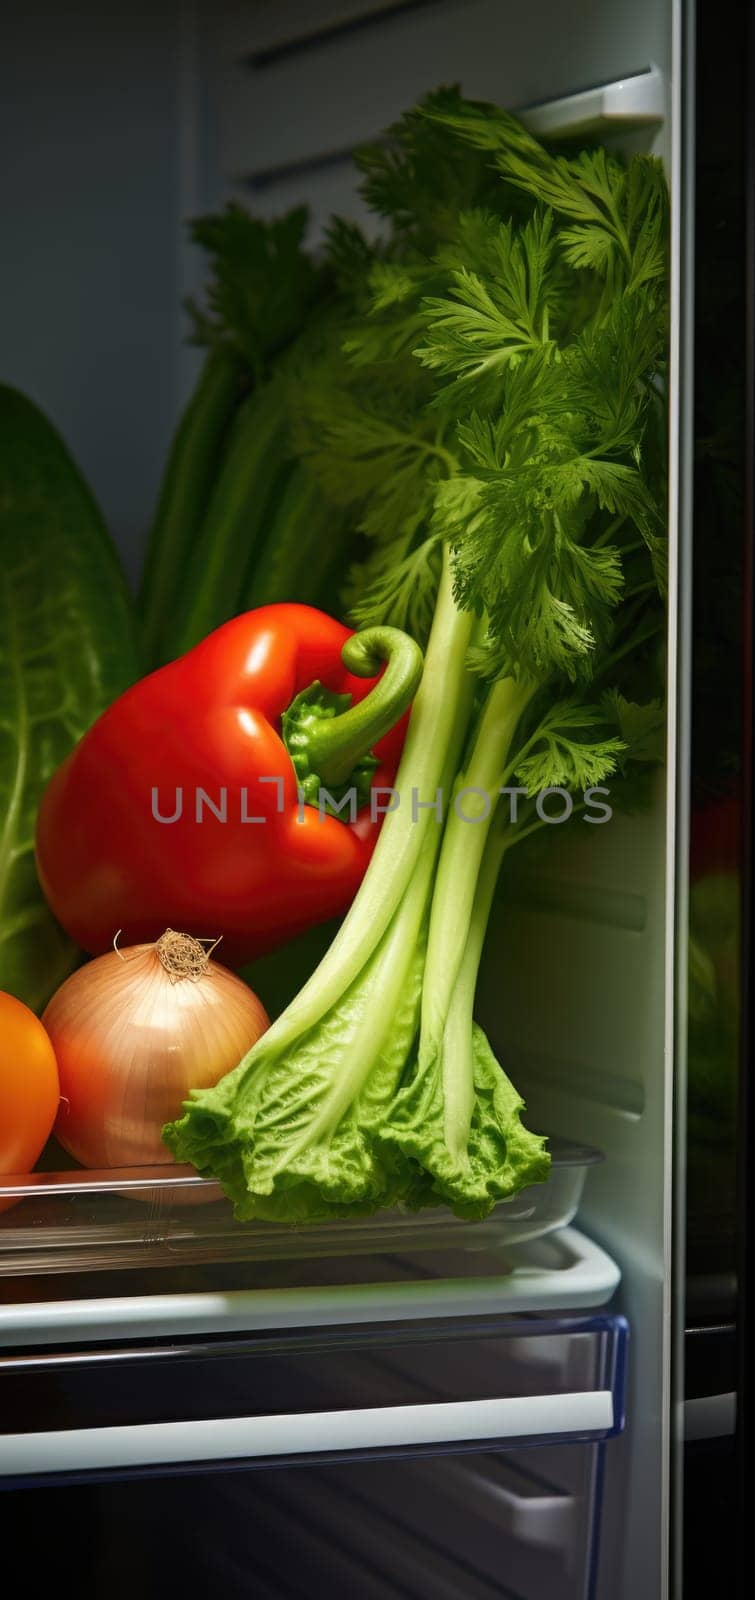 A refrigerator with vegetables and other food